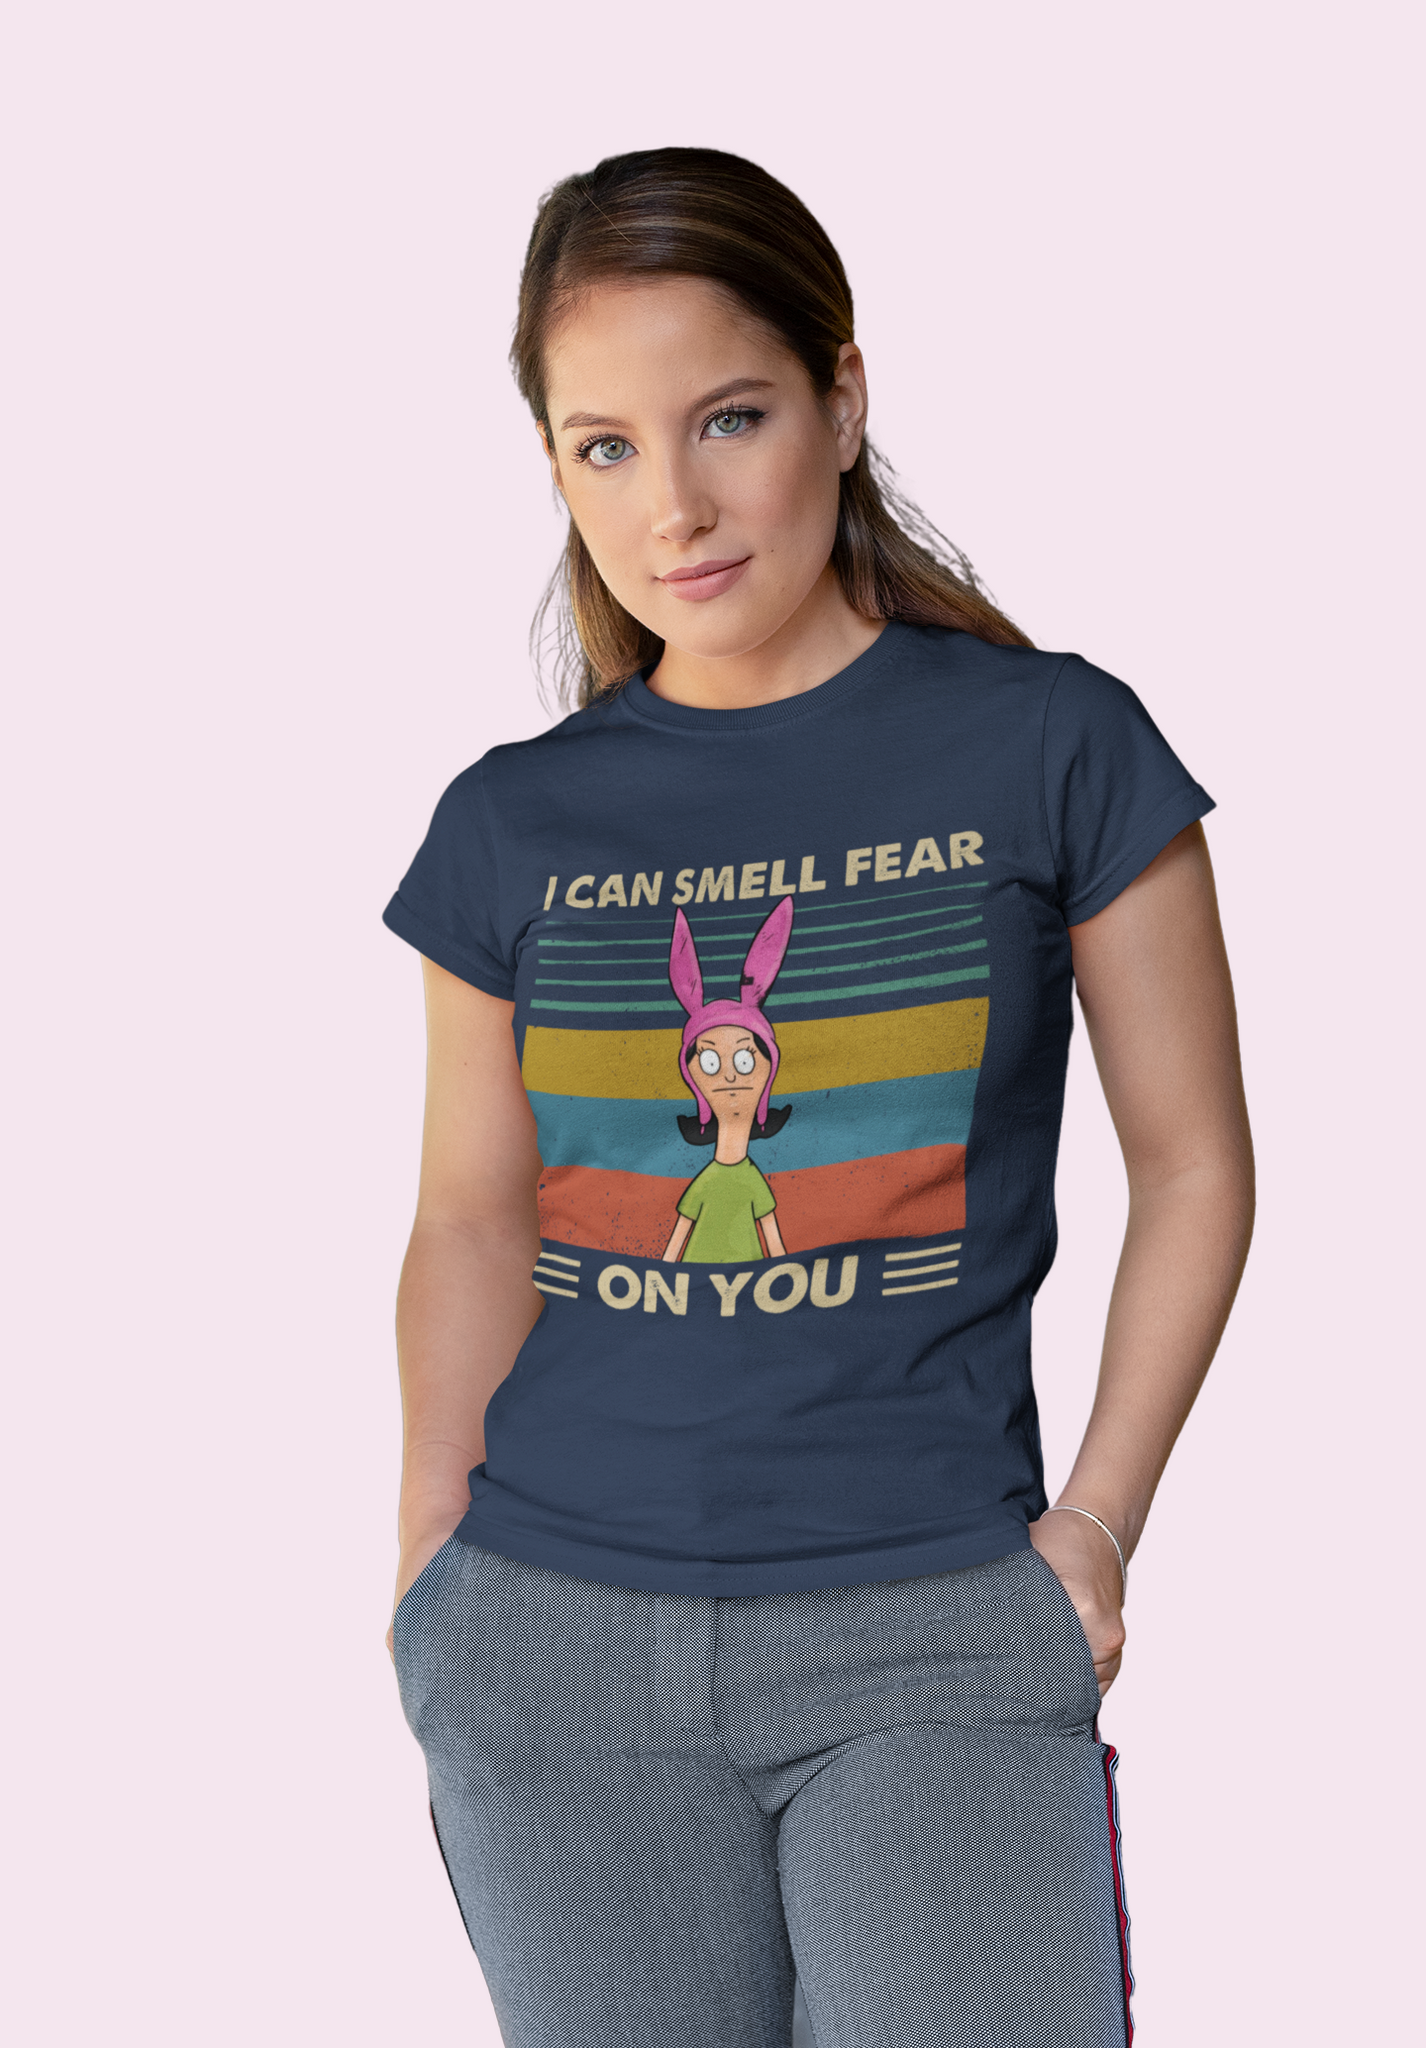 Bobs Burgers Vintage T Shirt, Louise Belcher T Shirt, I Can Smell Fear On You Tshirt